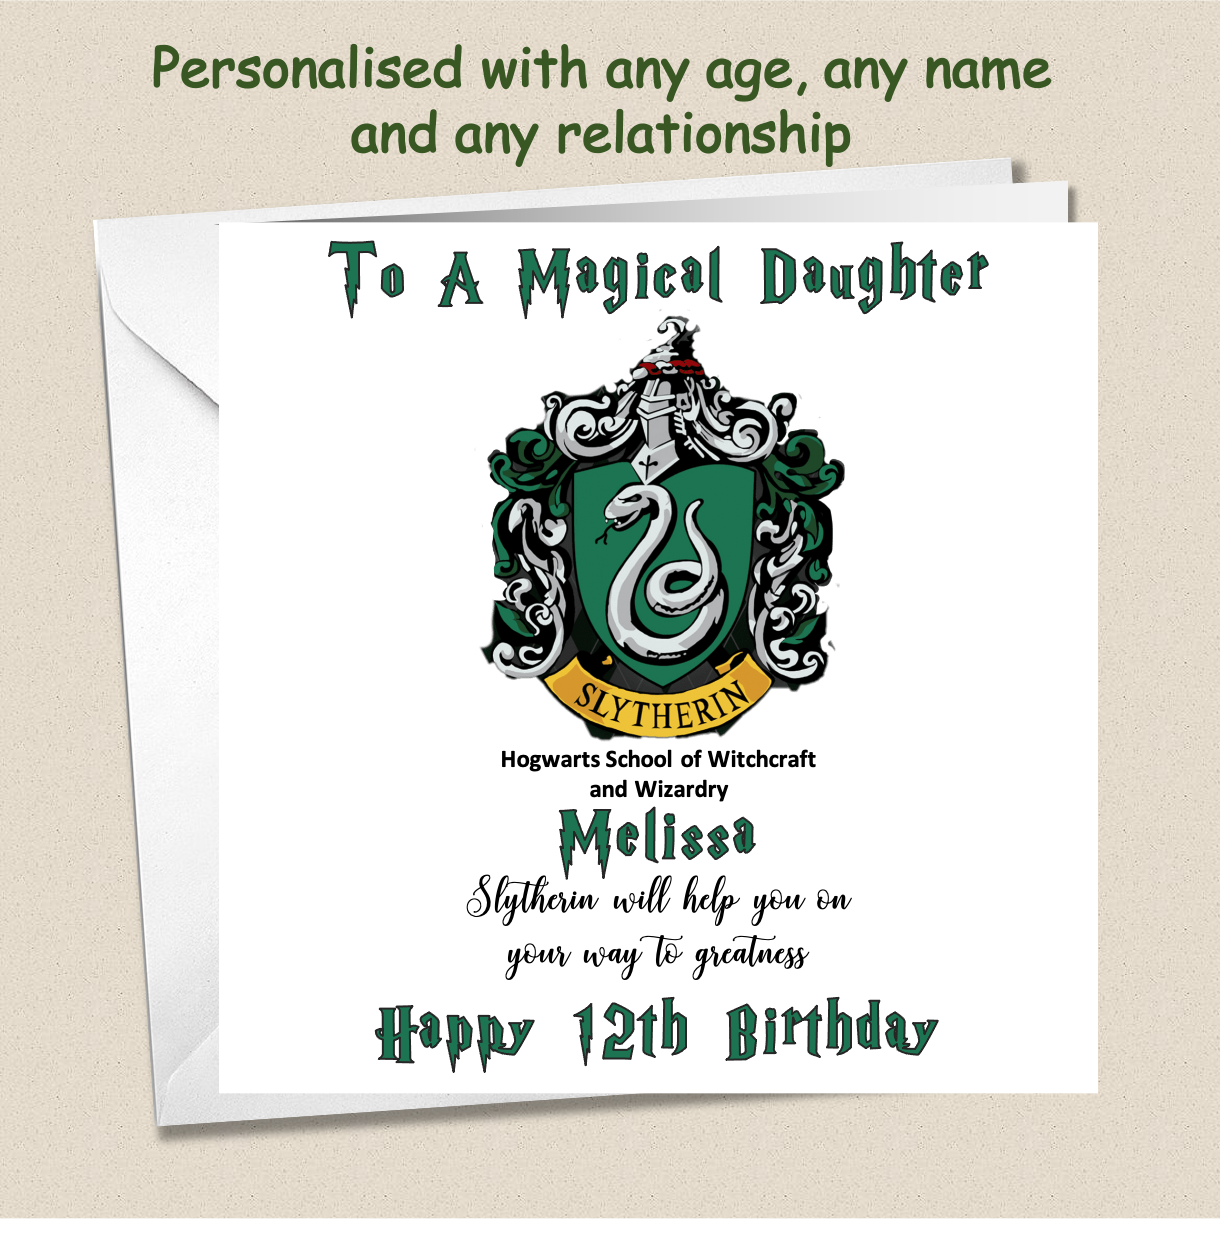 A personalised Slytherin birthday card, with Slytherin logo and motto, all in Harry Potter font.